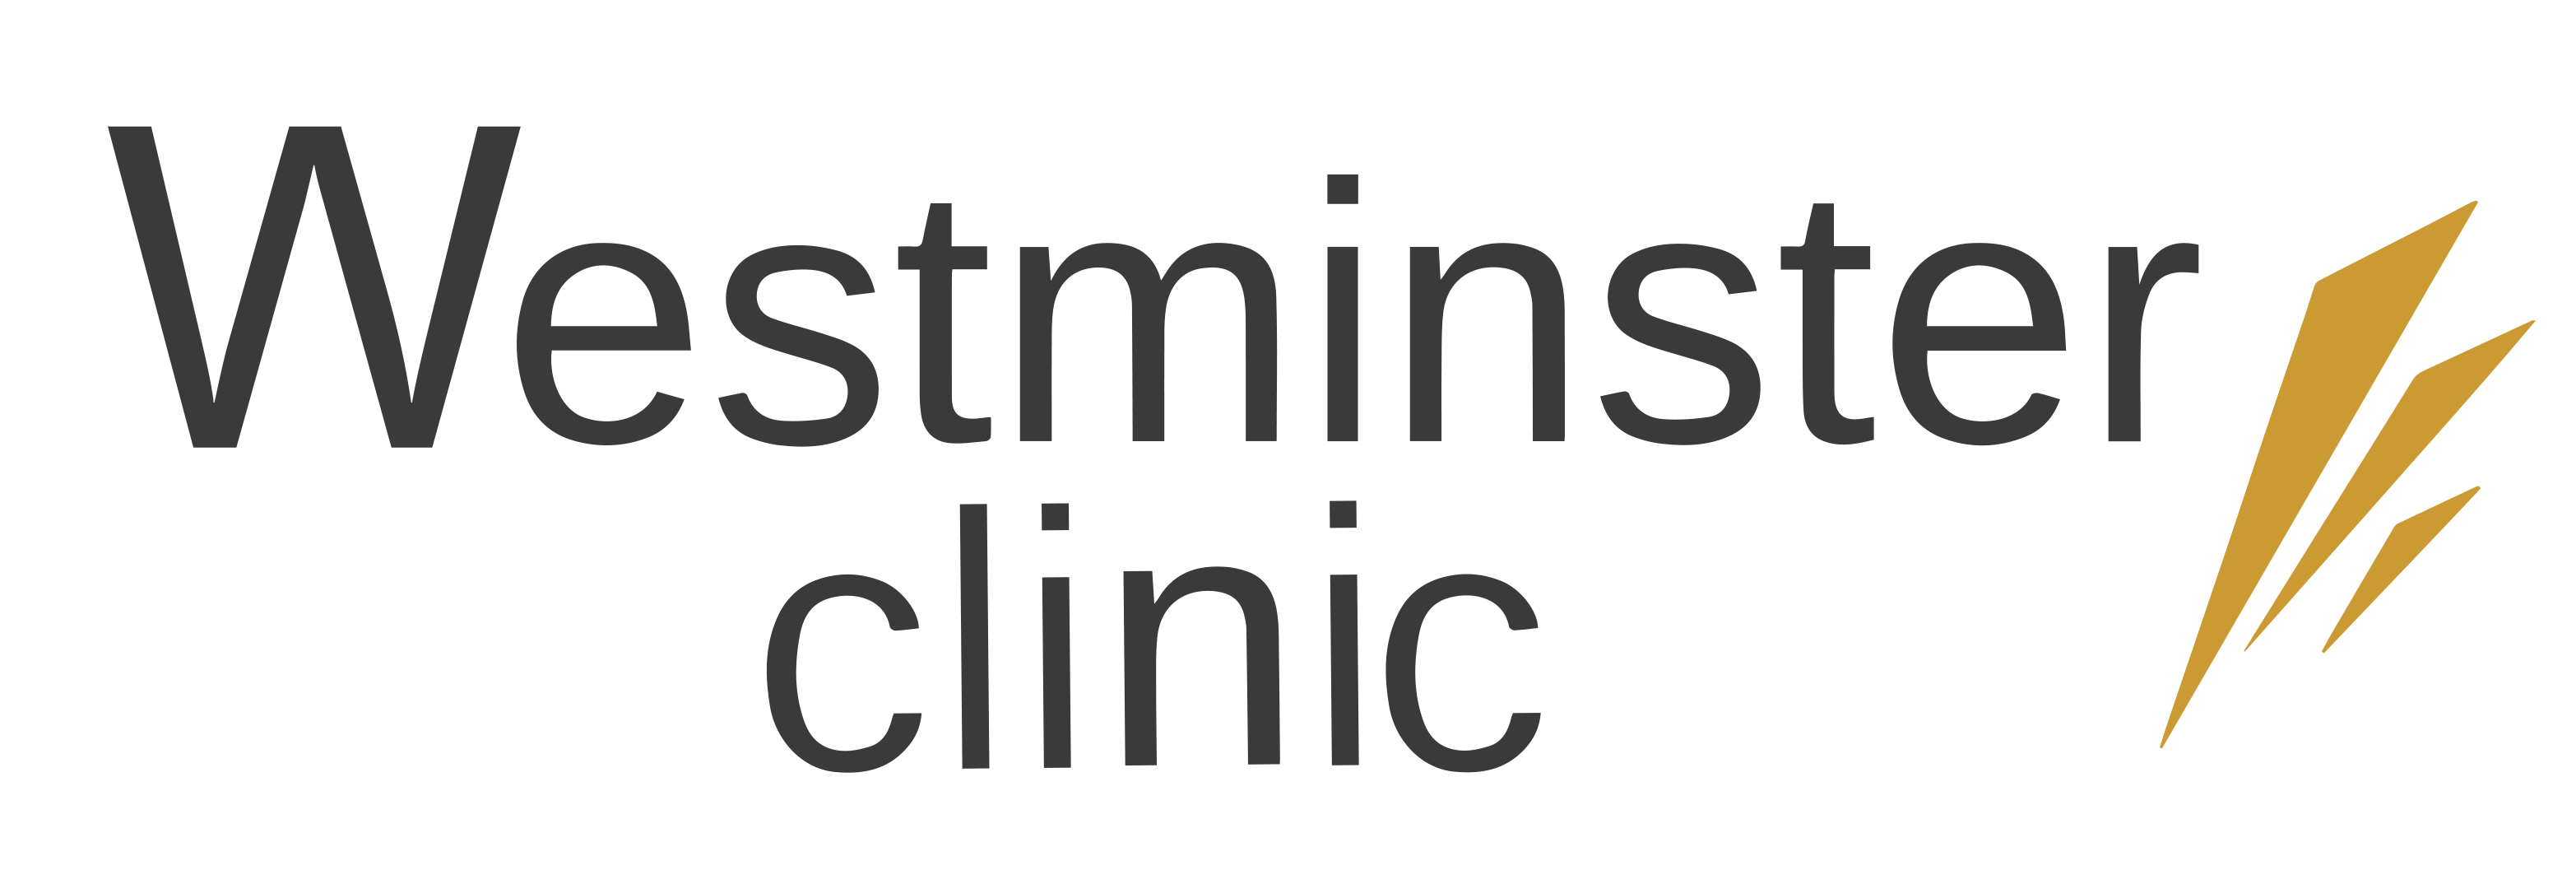 Hair transplant clinic london -westminster clinic